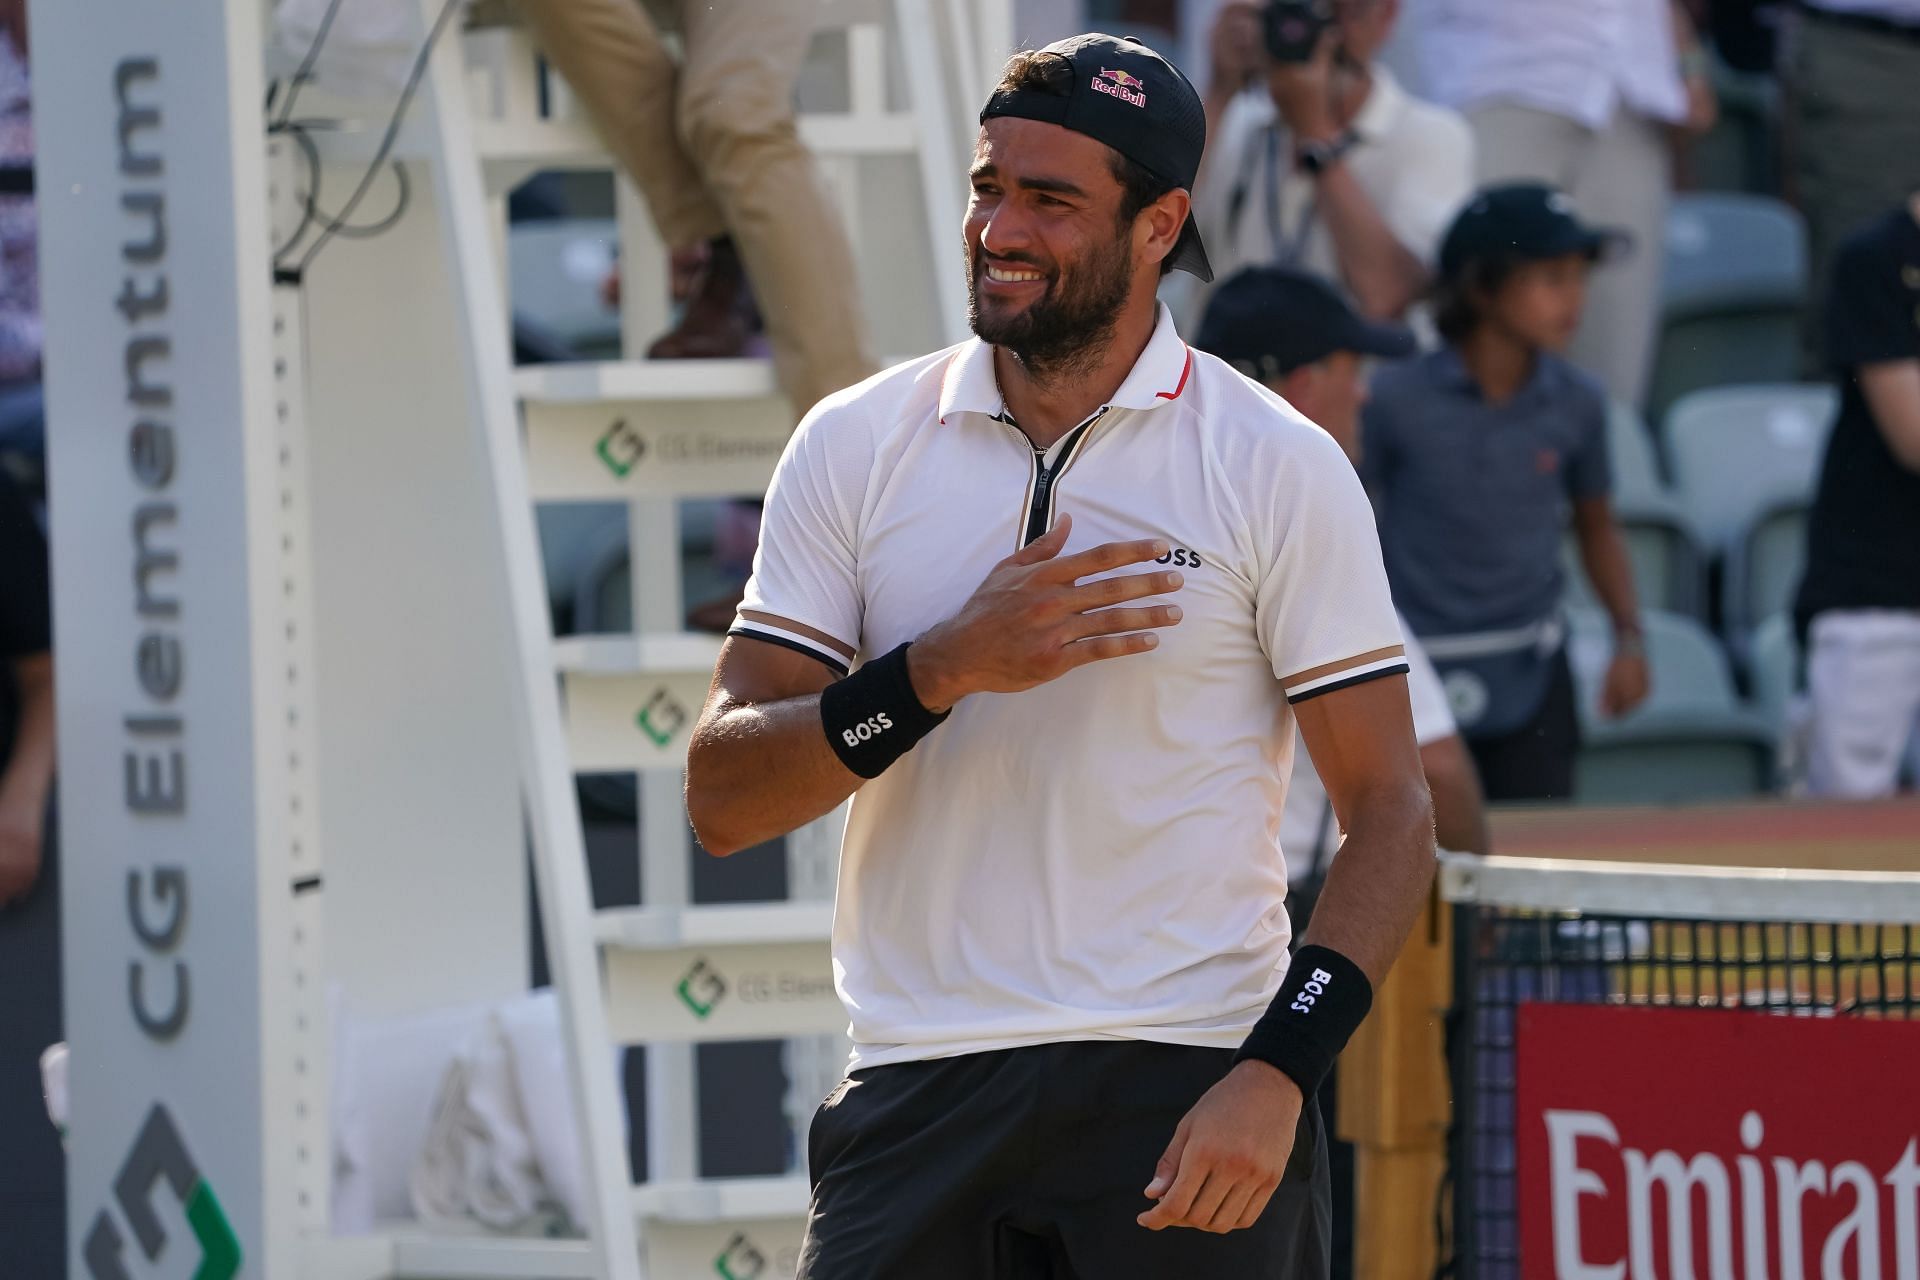 Matteo Berrettini received an unexpected marriage proposal from a fan